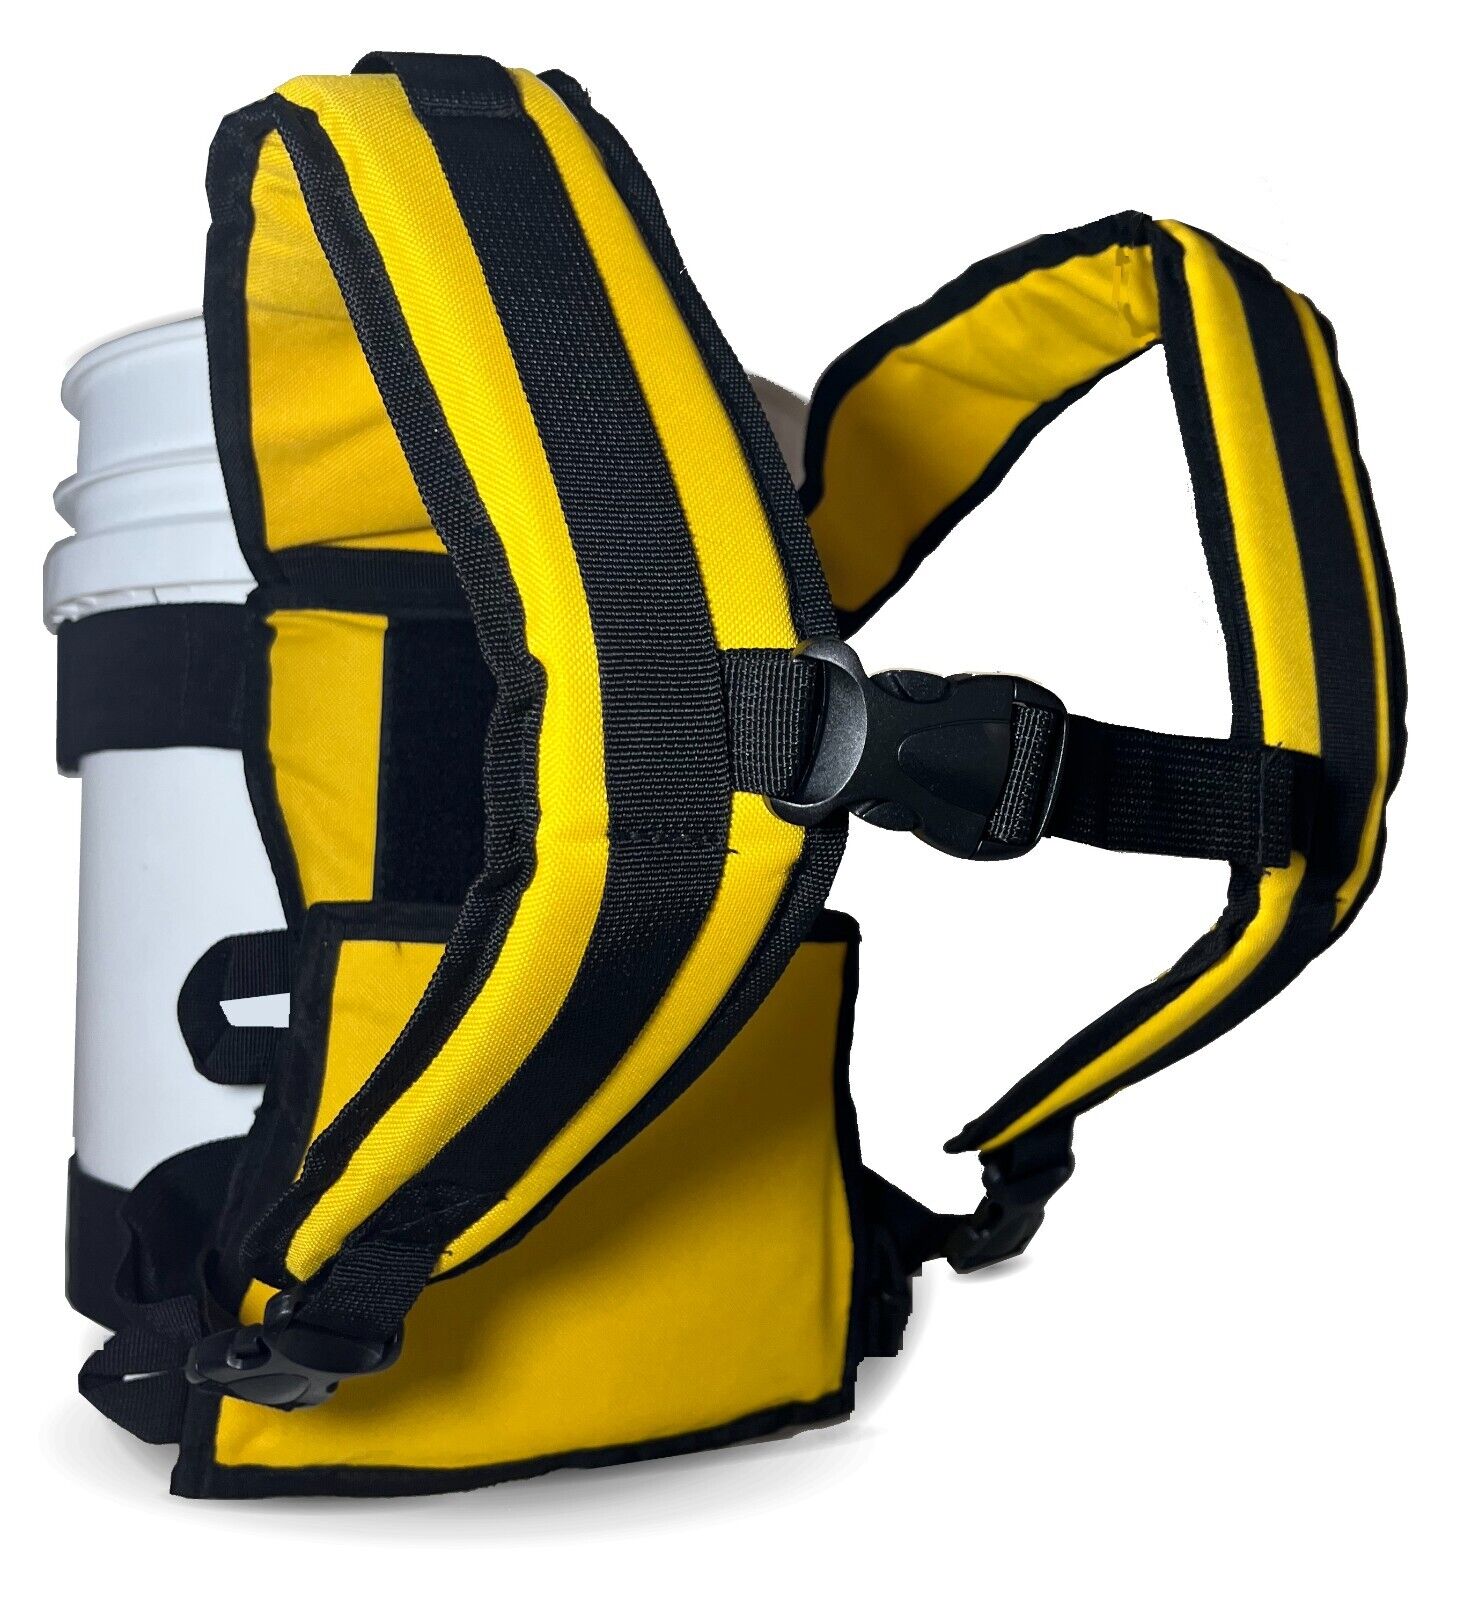 Backpack for hauling 5 Gallon Buckets and Pressure Sprayers and Shop Vacs